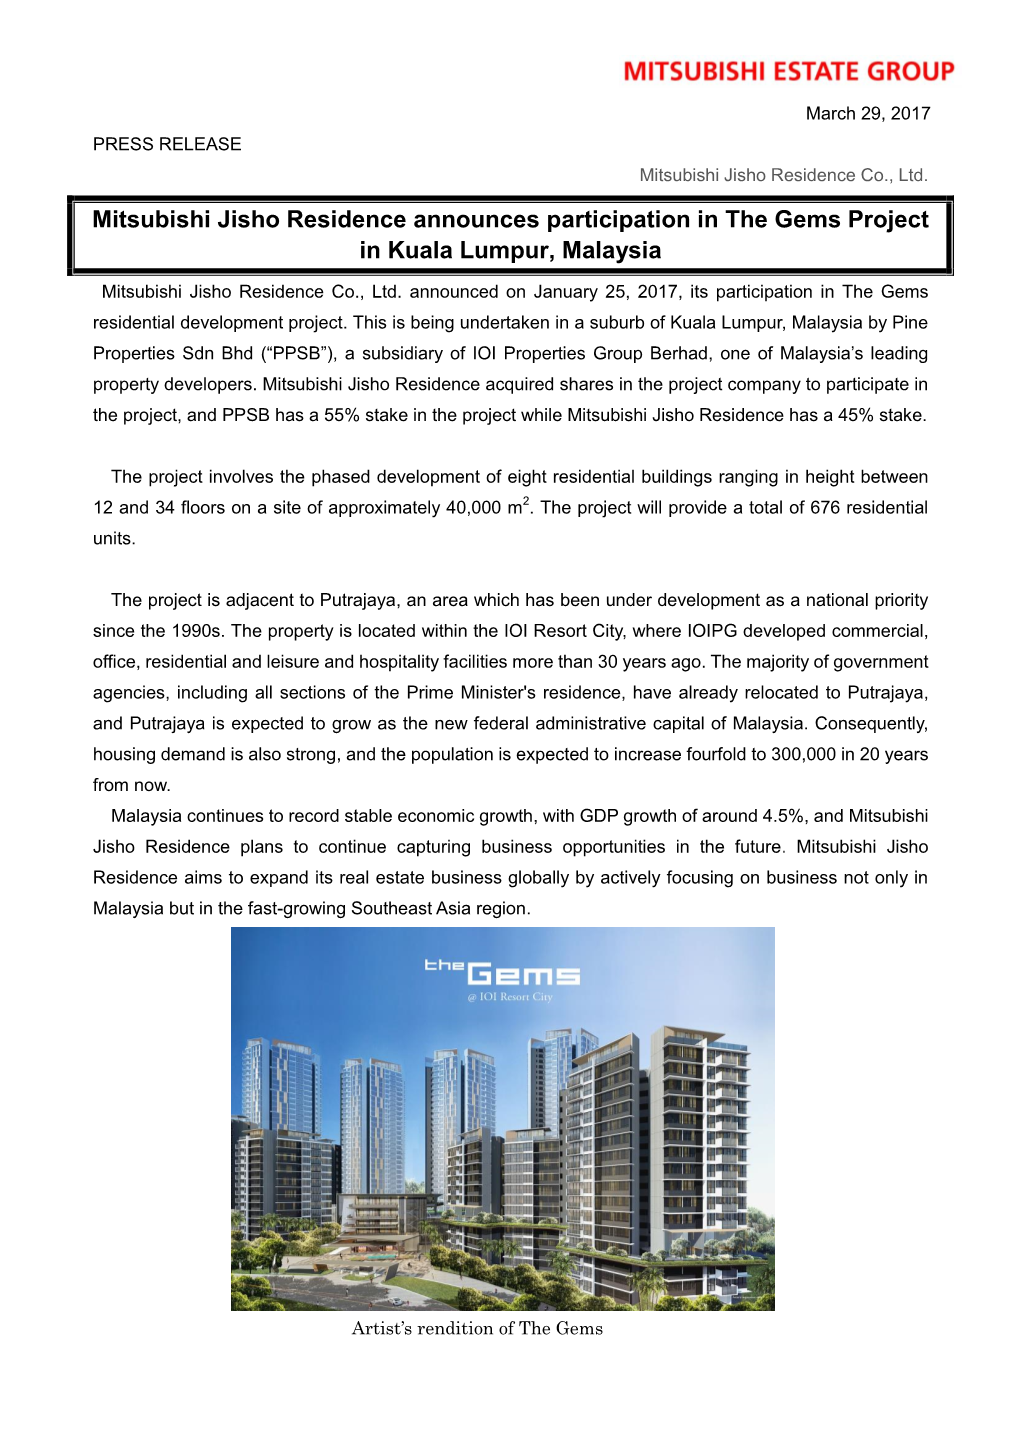 Mitsubishi Jisho Residence Announces Participation in the Gems Project in Kuala Lumpur, Malaysia